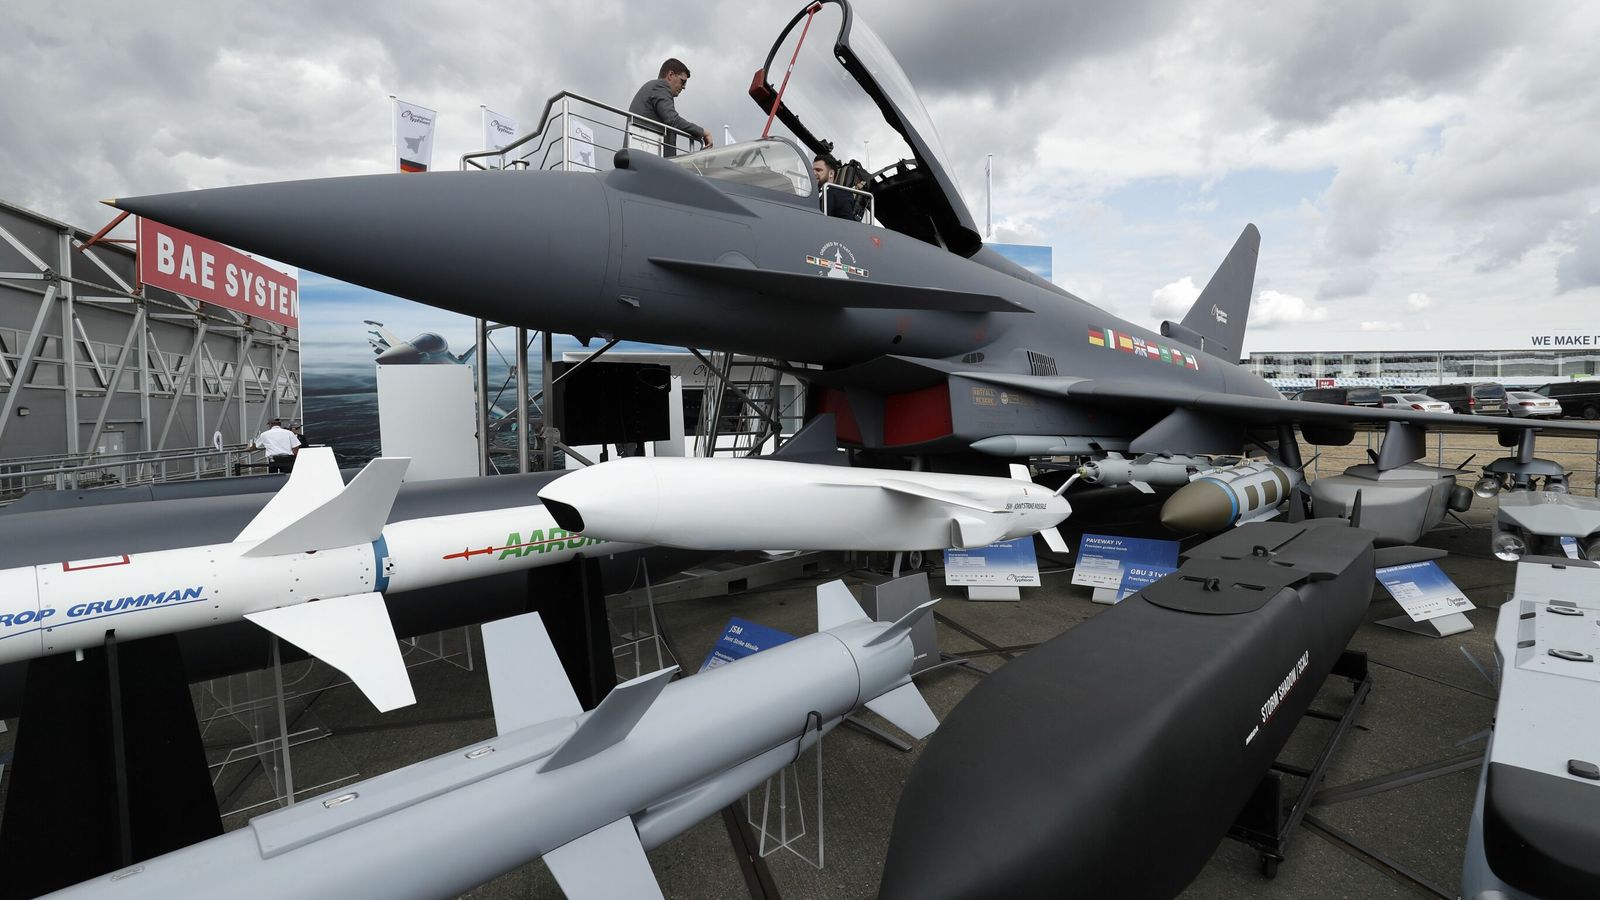 BAE Systems: UK arms maker enjoys record year for new orders as West's defence spending rises amid Ukraine war